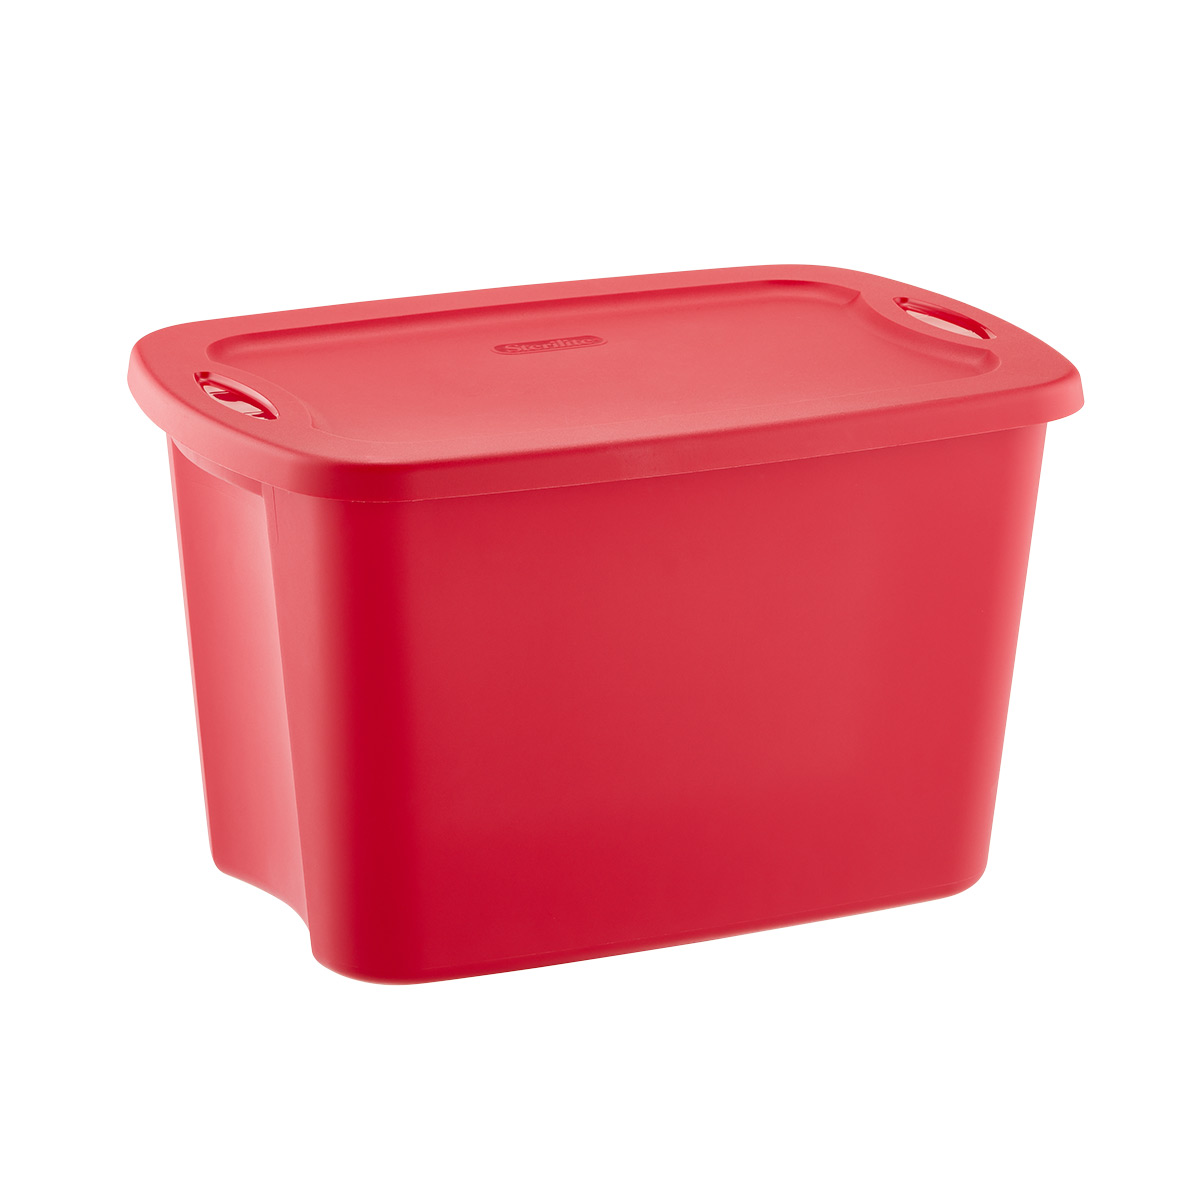 https://www.containerstore.com/catalogimages/498004/10086391-18-gallon-tote-box-red.jpg